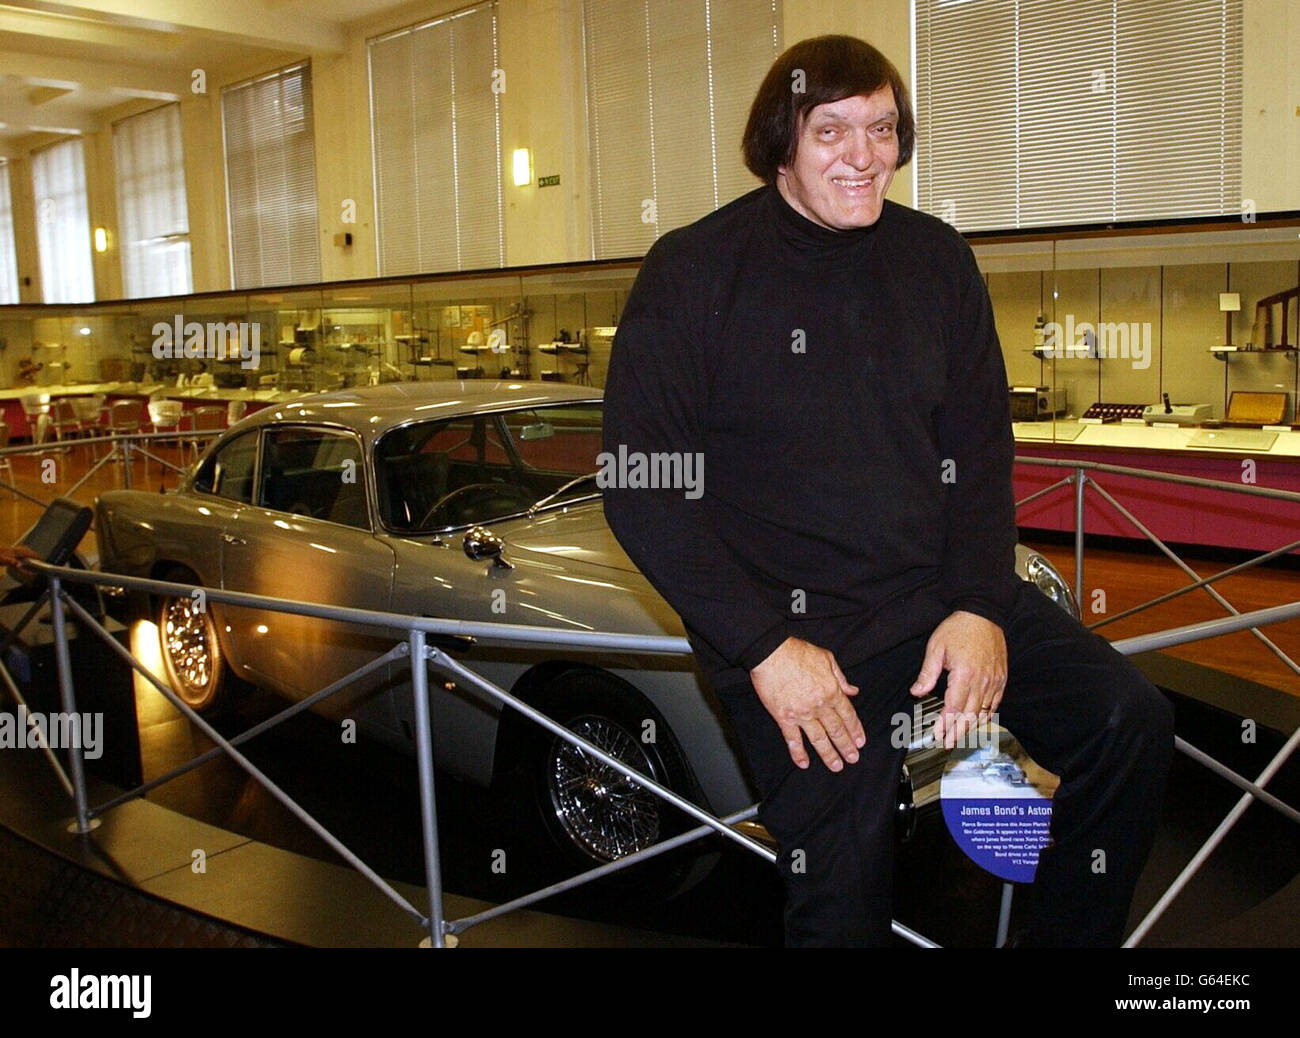 Richard Kiel, who played 'Jaws' in James Bond movies, poses with an Aston Martin from 1995 movie, Golden Eye, at the Science Museum, London. The exhibition is a retrospective of Bond memorabilia, coinciding with the launch of the new movie. Stock Photo